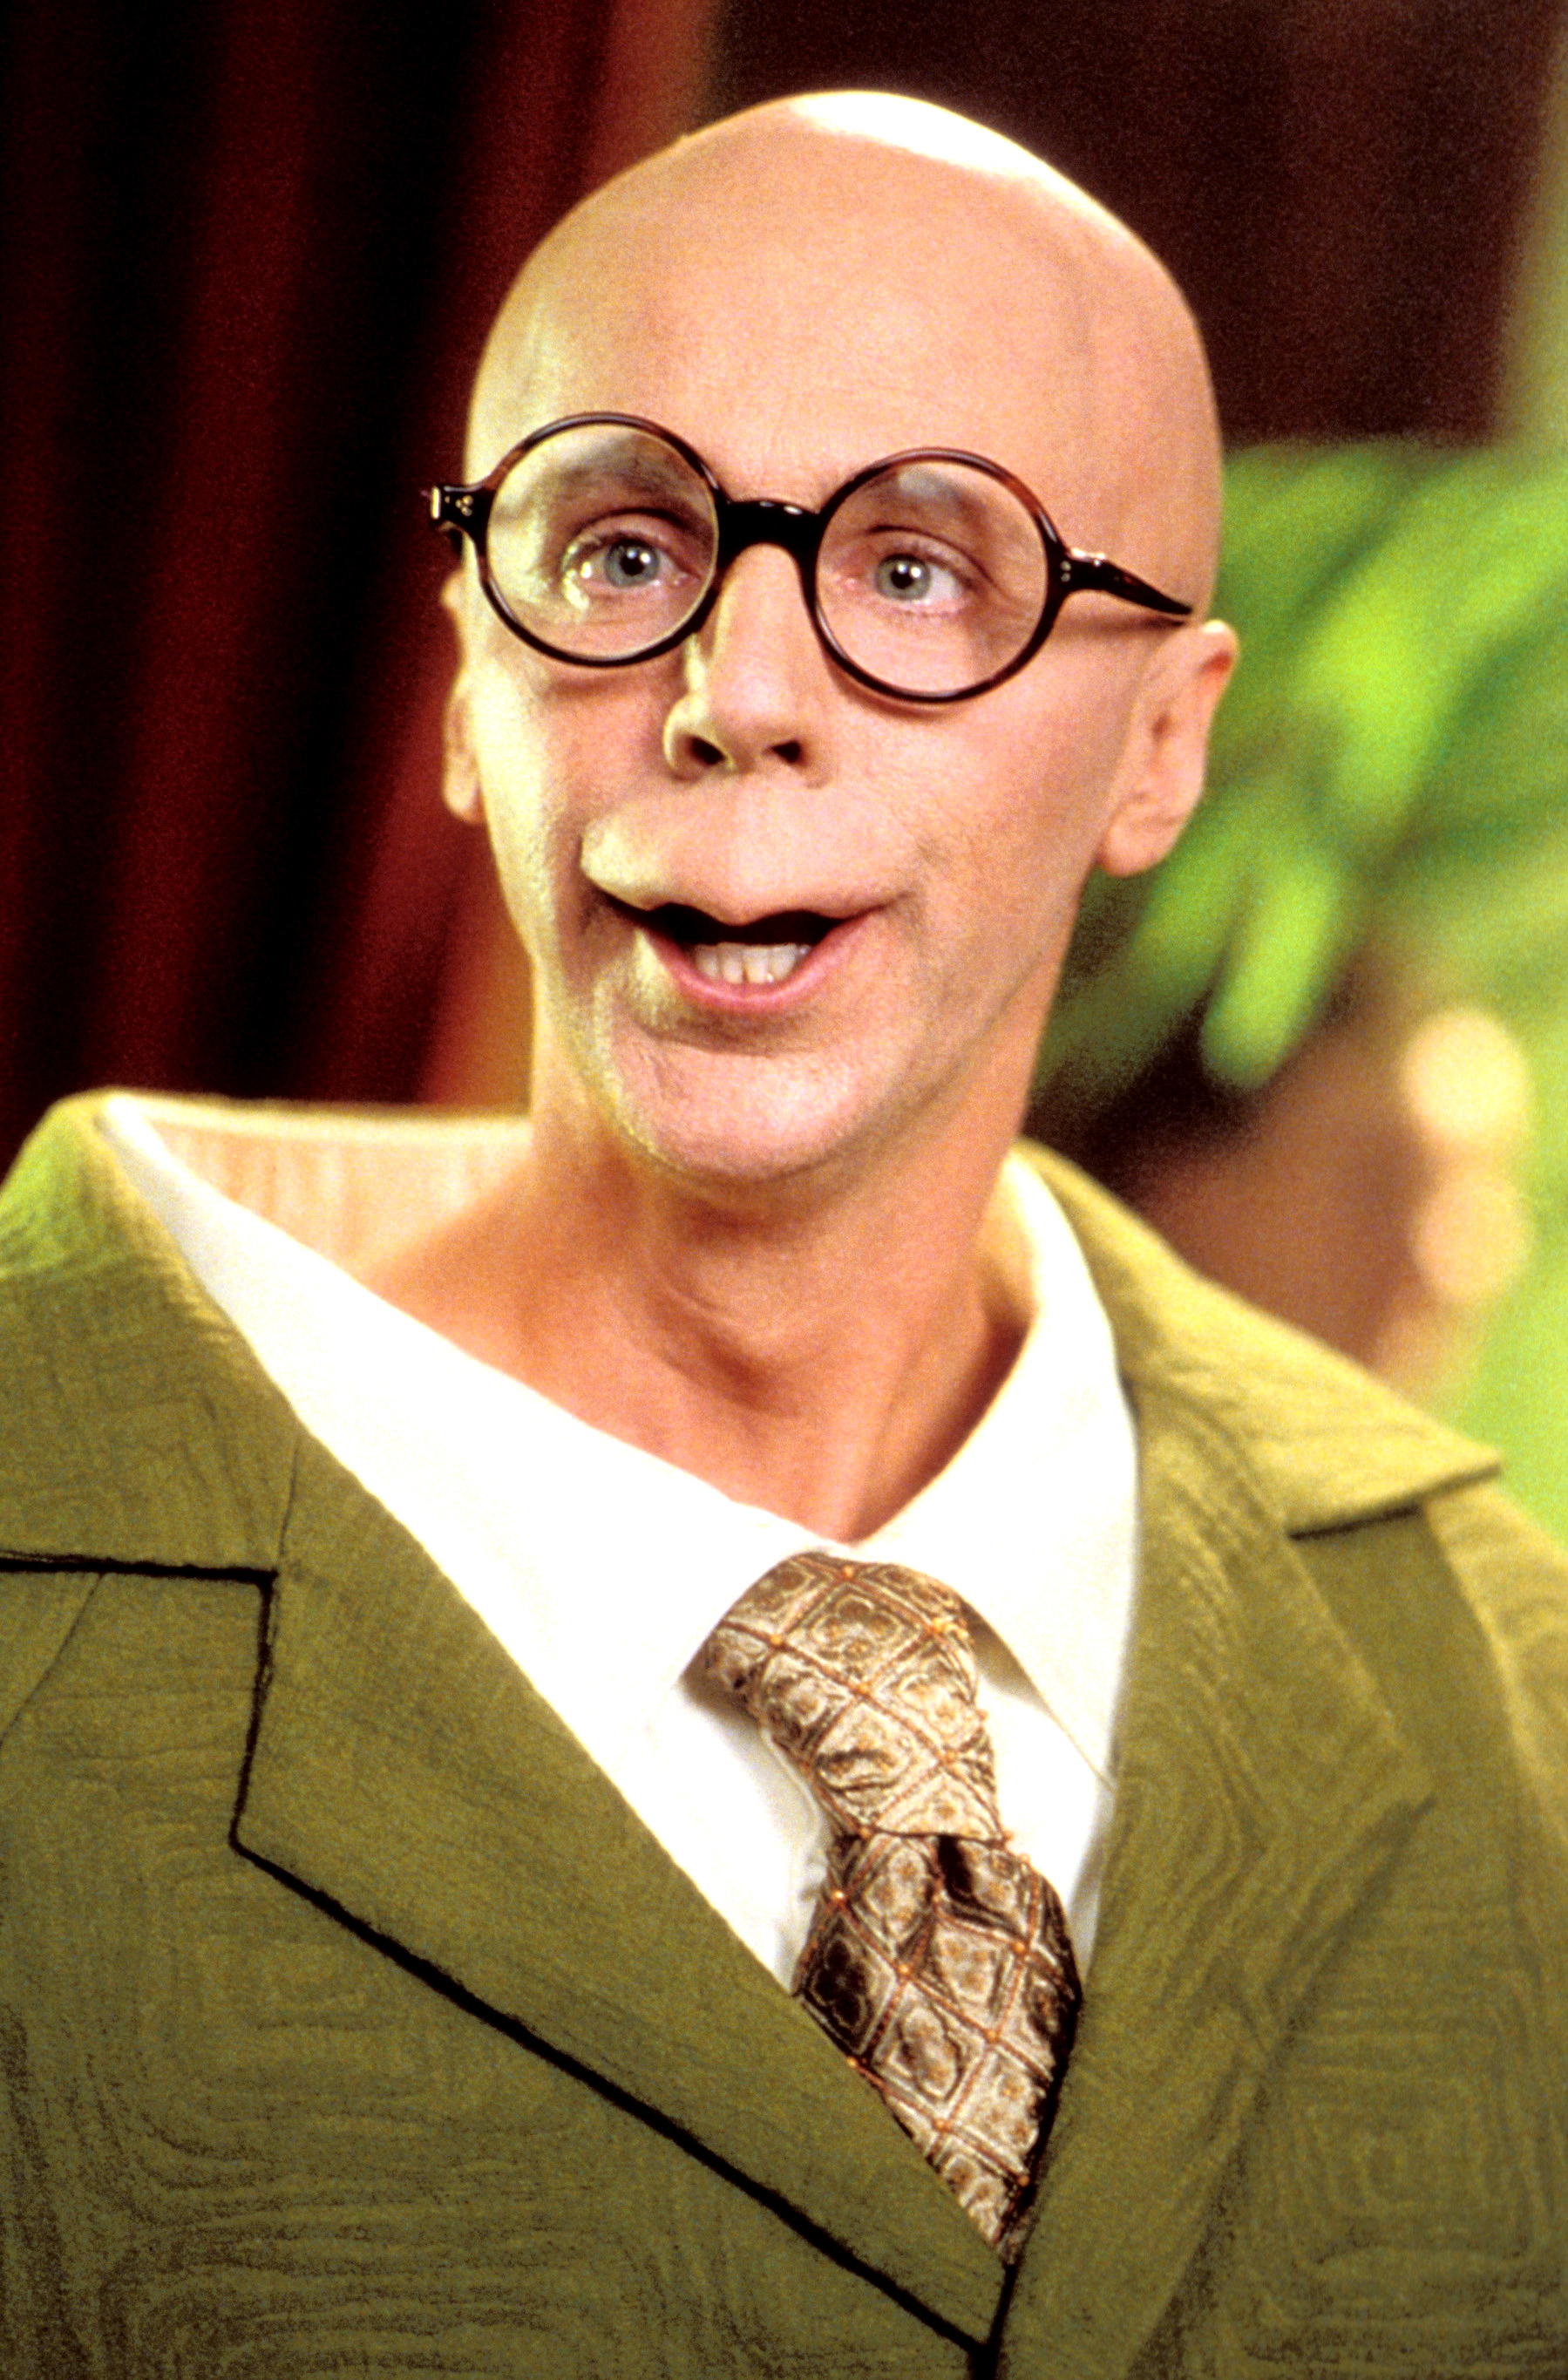 Character Dr. Evil from Austin Powers films, wearing a gray suit and black-rimmed glasses